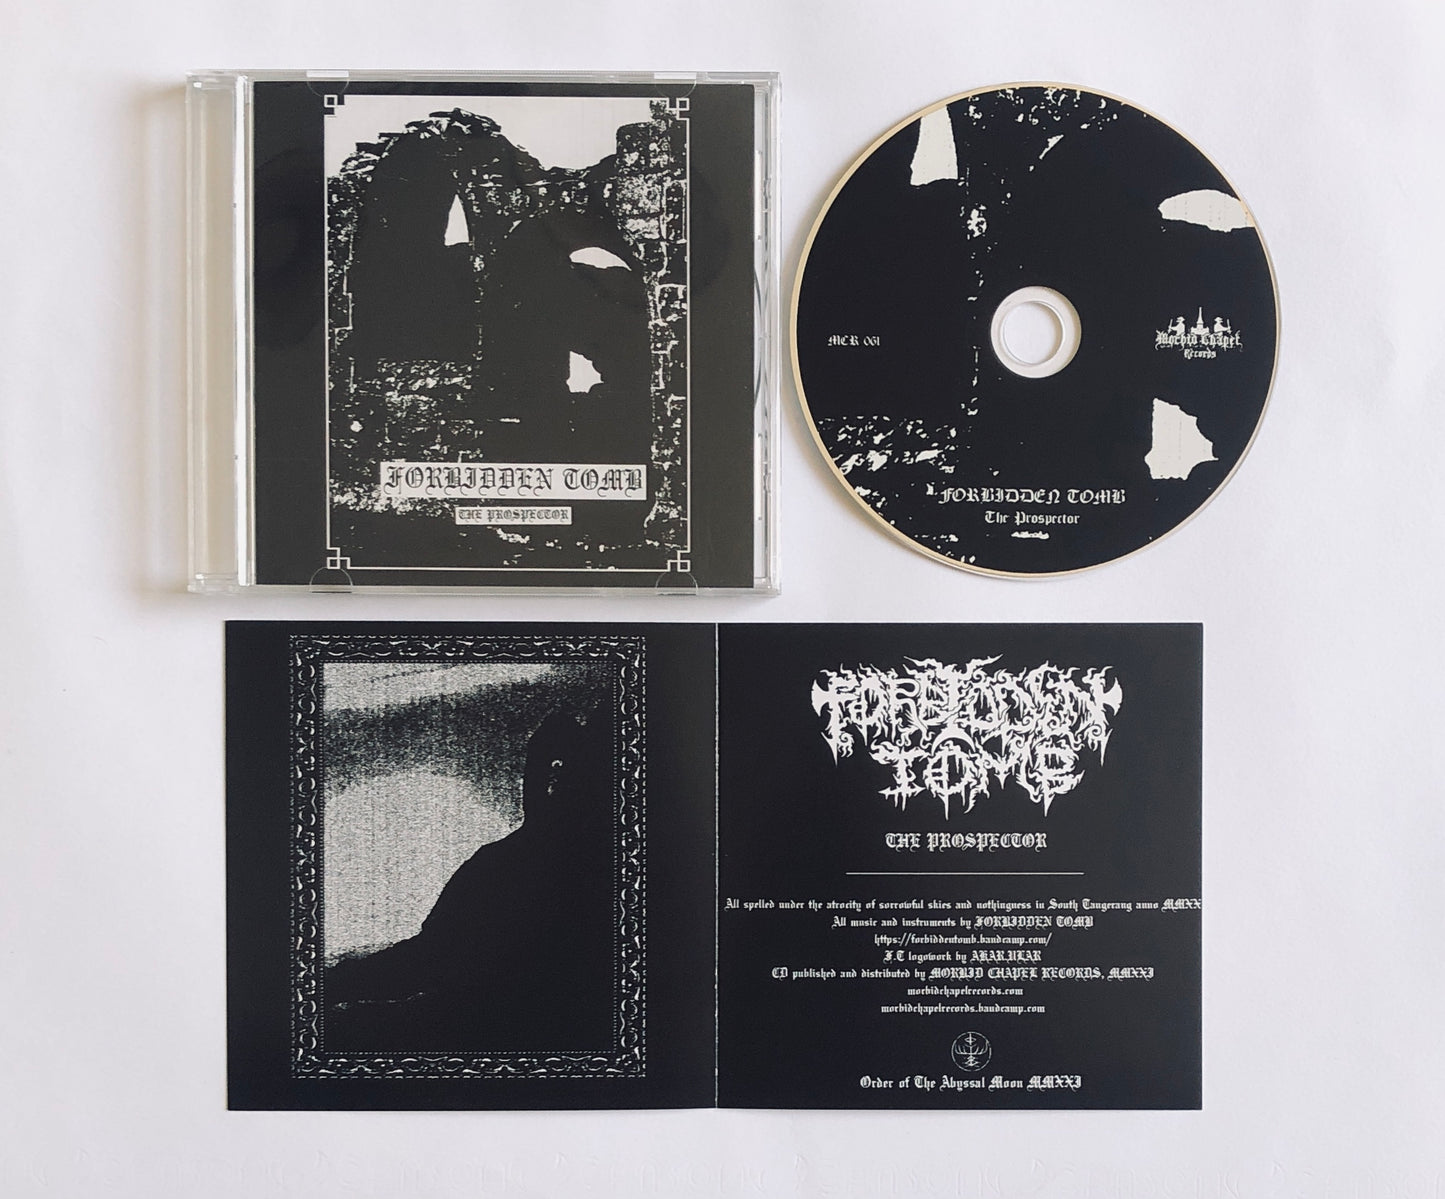 Forbidden Tomb (Indonesia) "The Prospector"- CDs